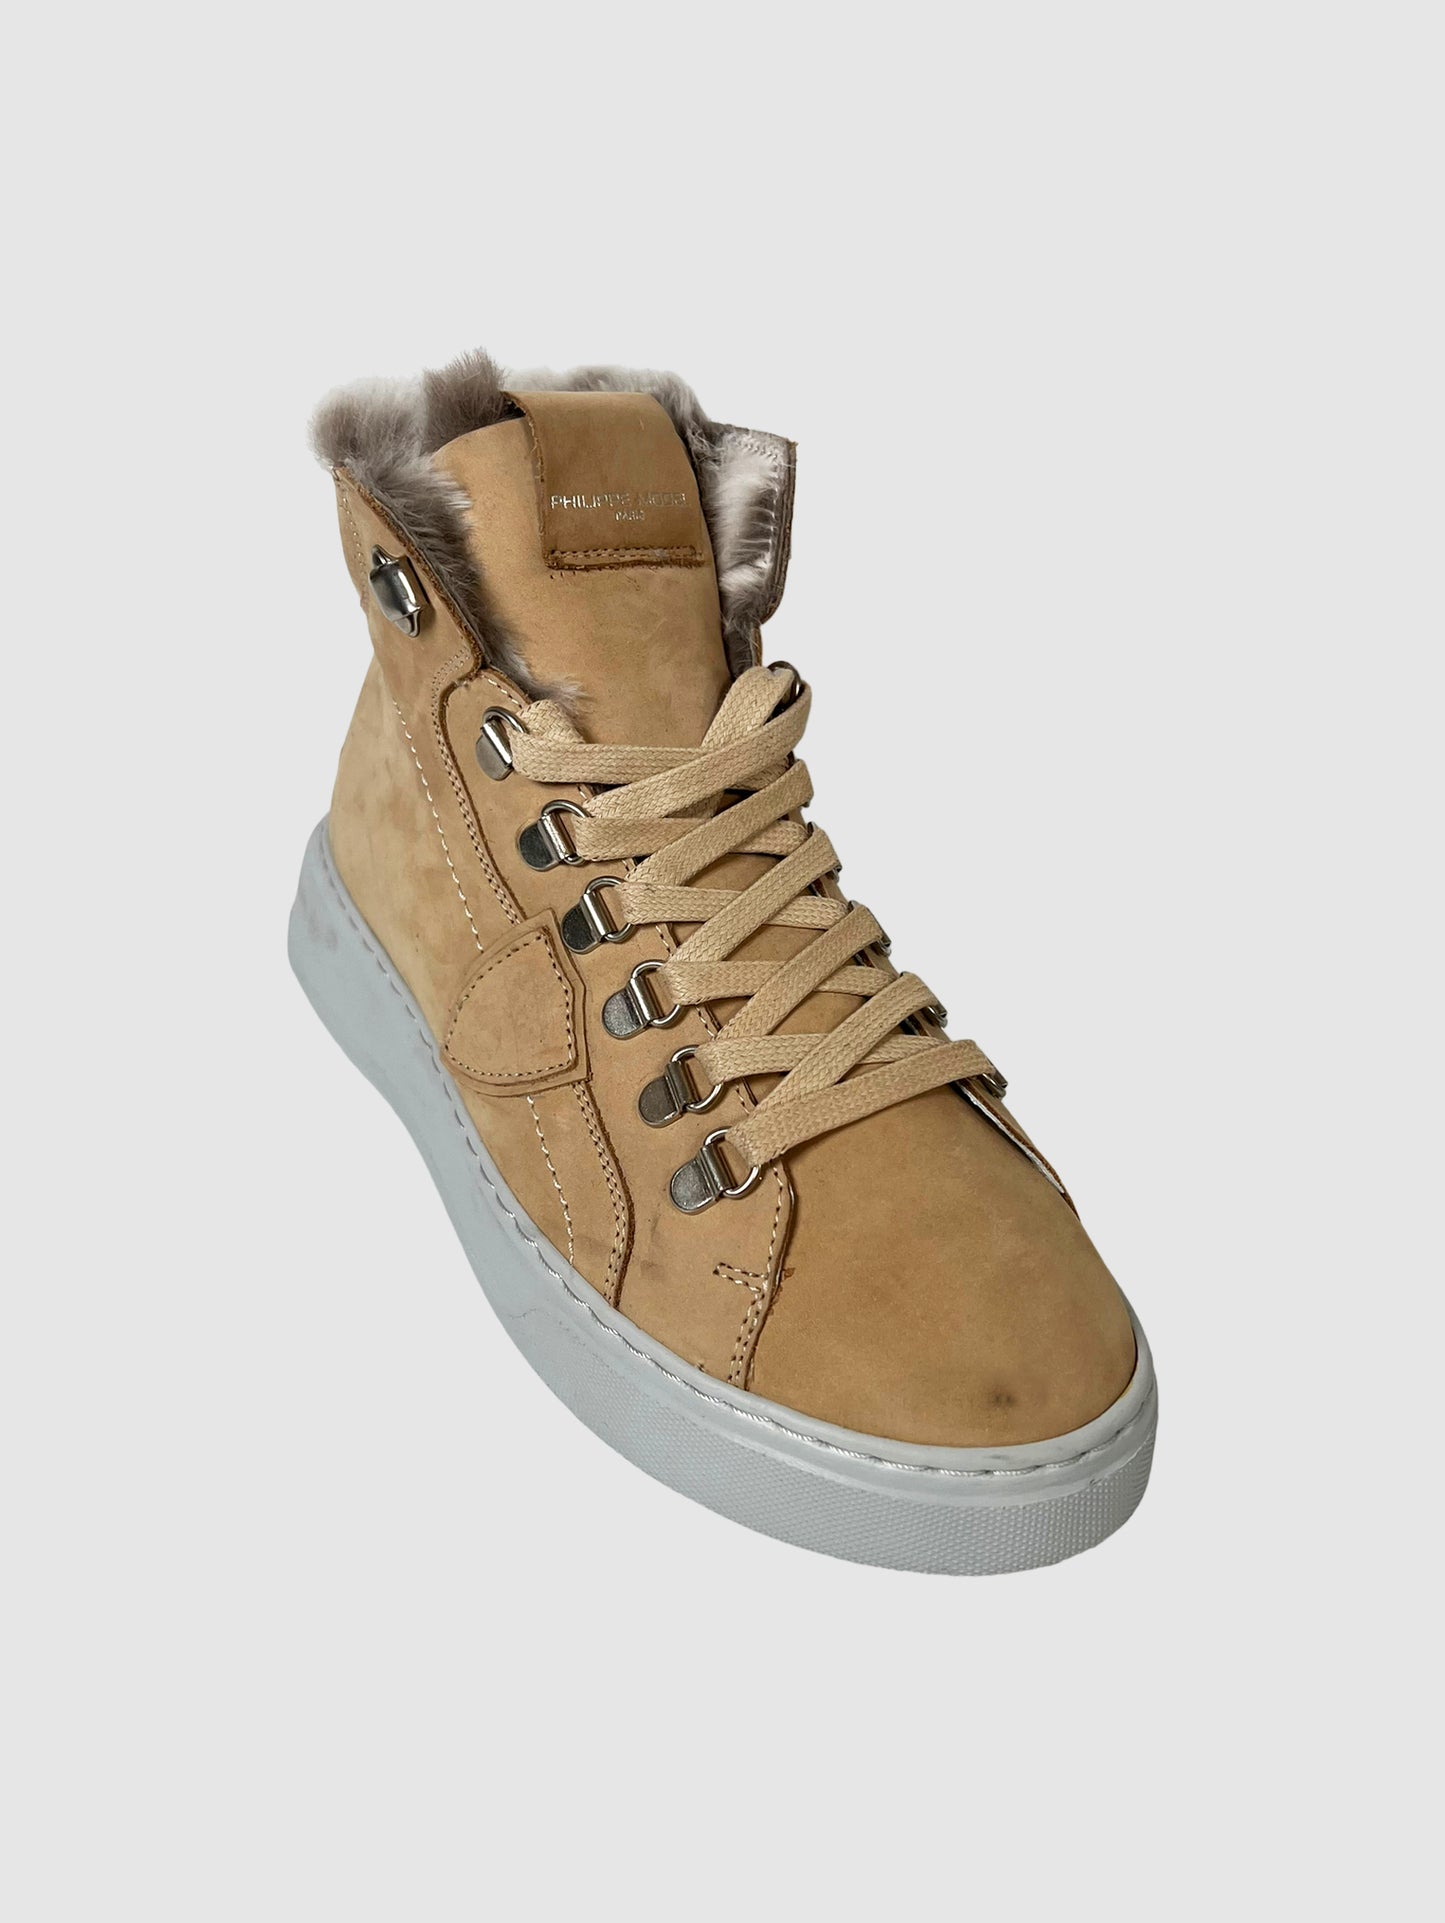 Philippe Model Suede High Top Sneakers - Size 7